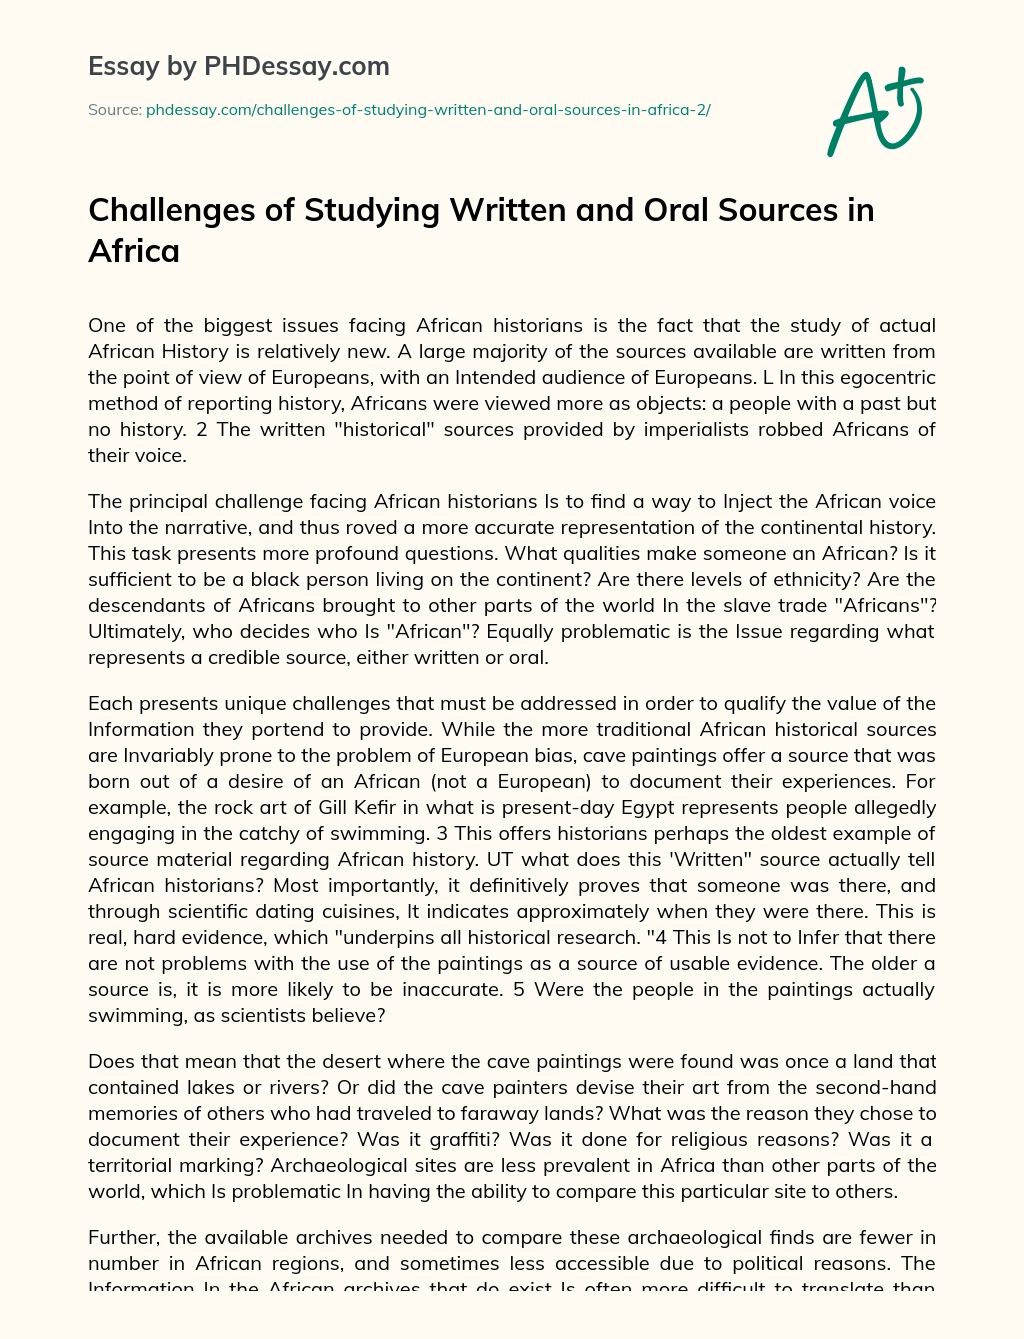 Challenges of studying written and oral sources in Africa essay